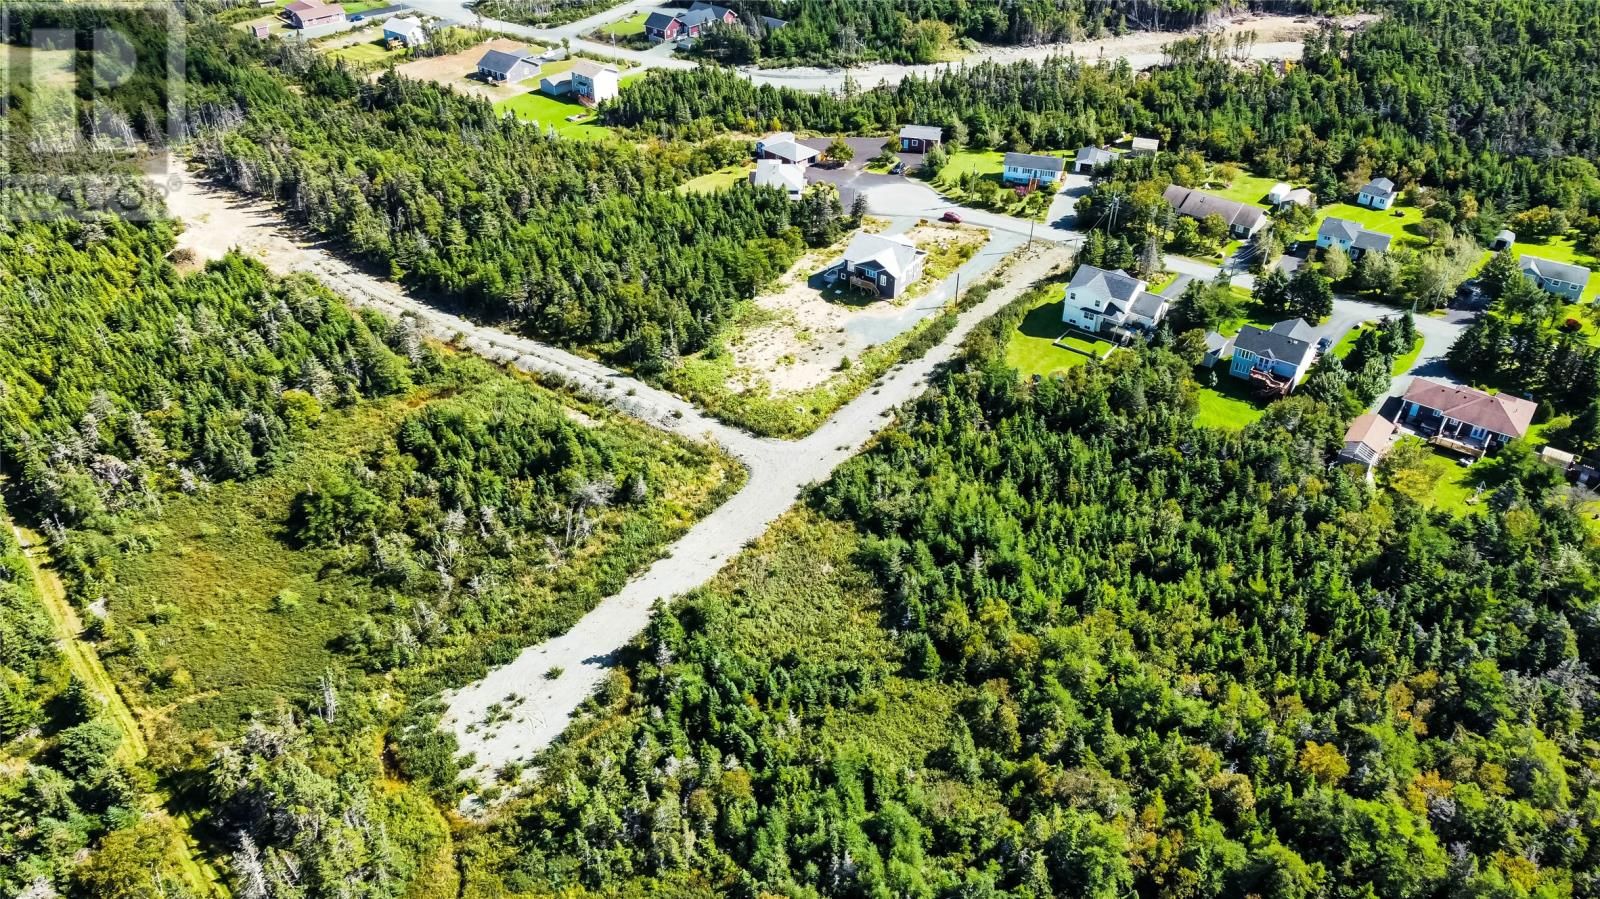 Main Photo: 15 Philip's Place in Flatrock: Vacant Land for sale : MLS®# 1250197